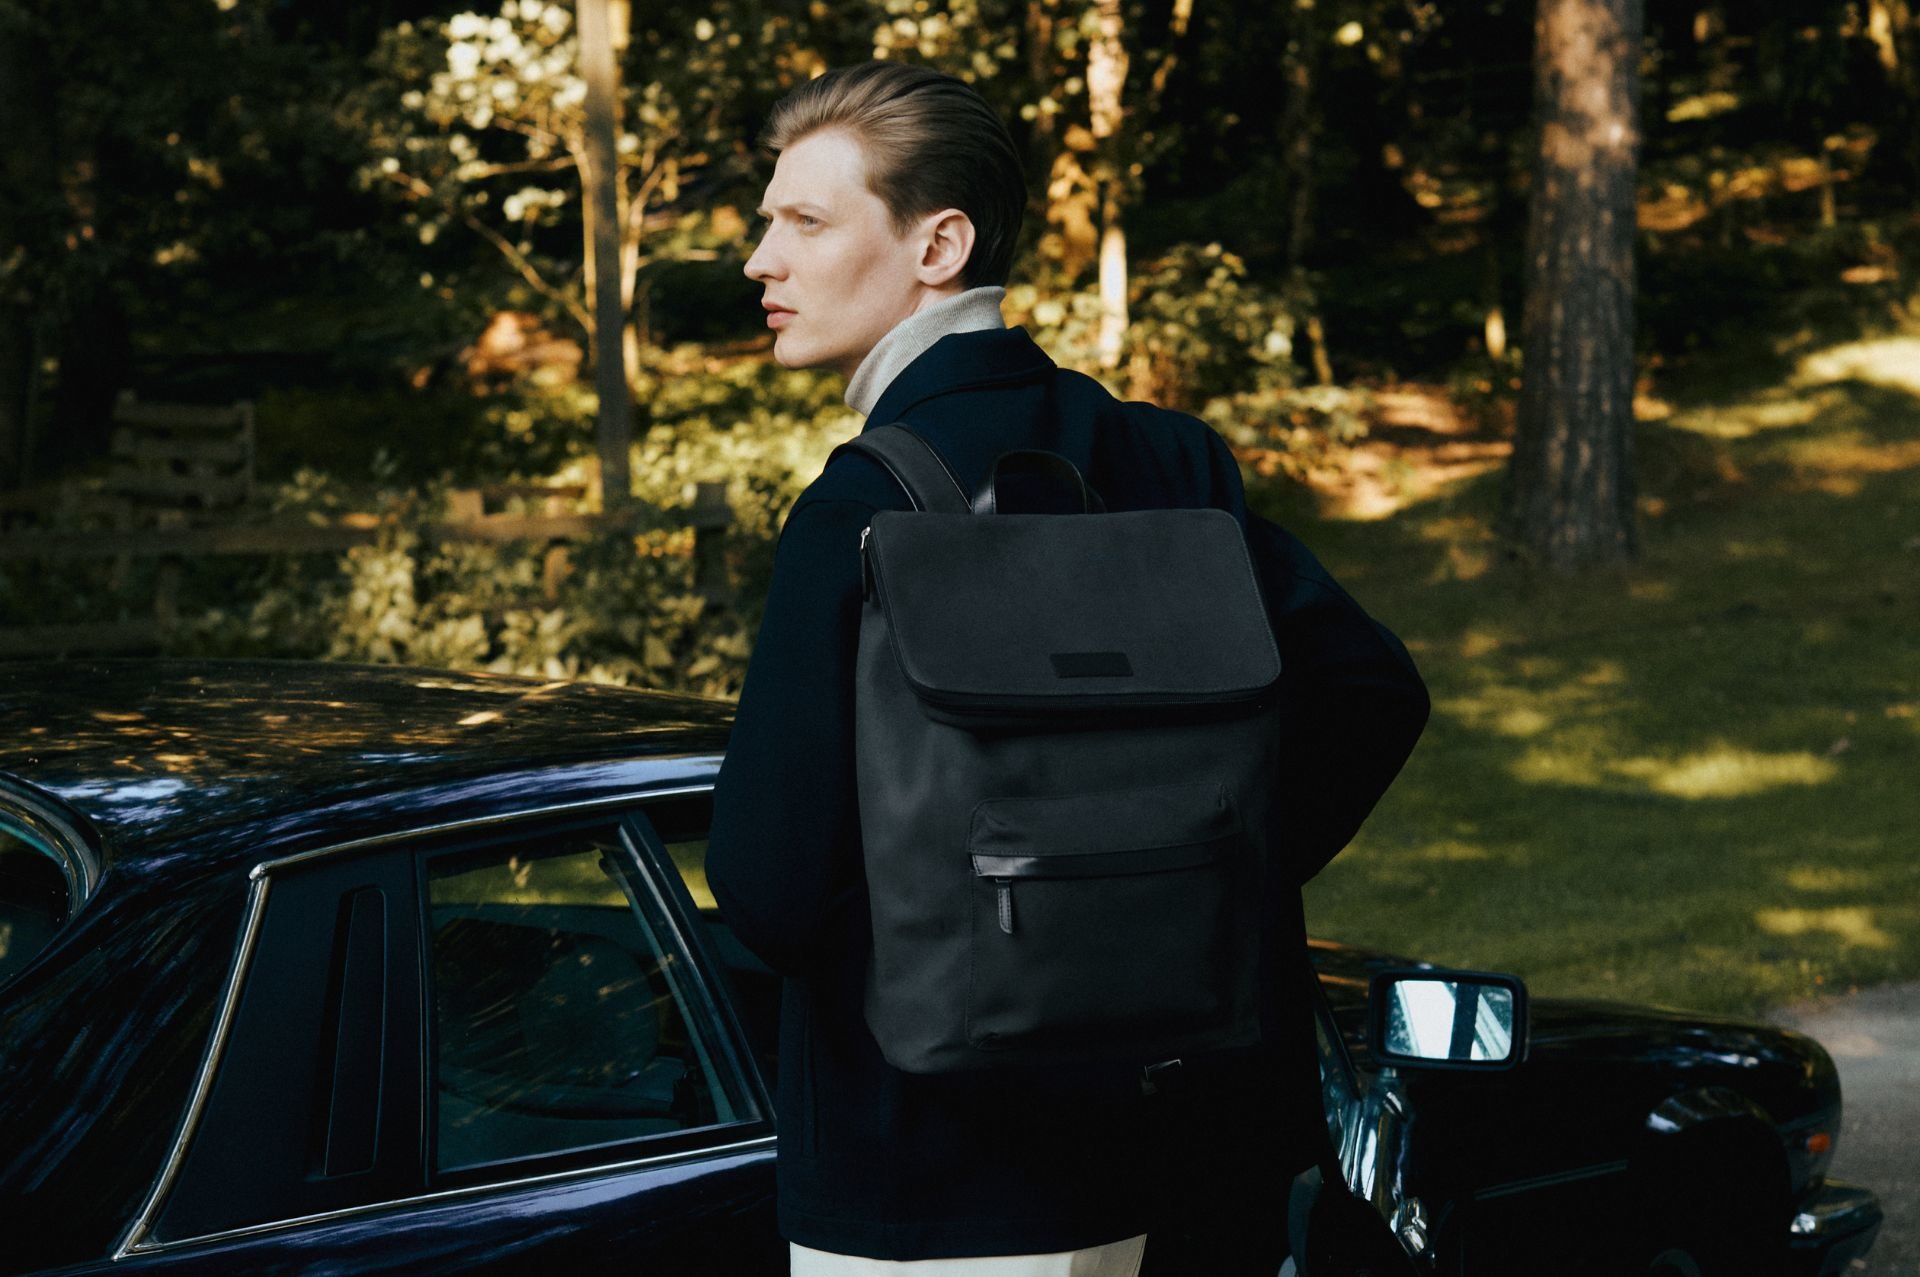 Man wearing blue coat and grey nubuck backpack looks back, with black car in background